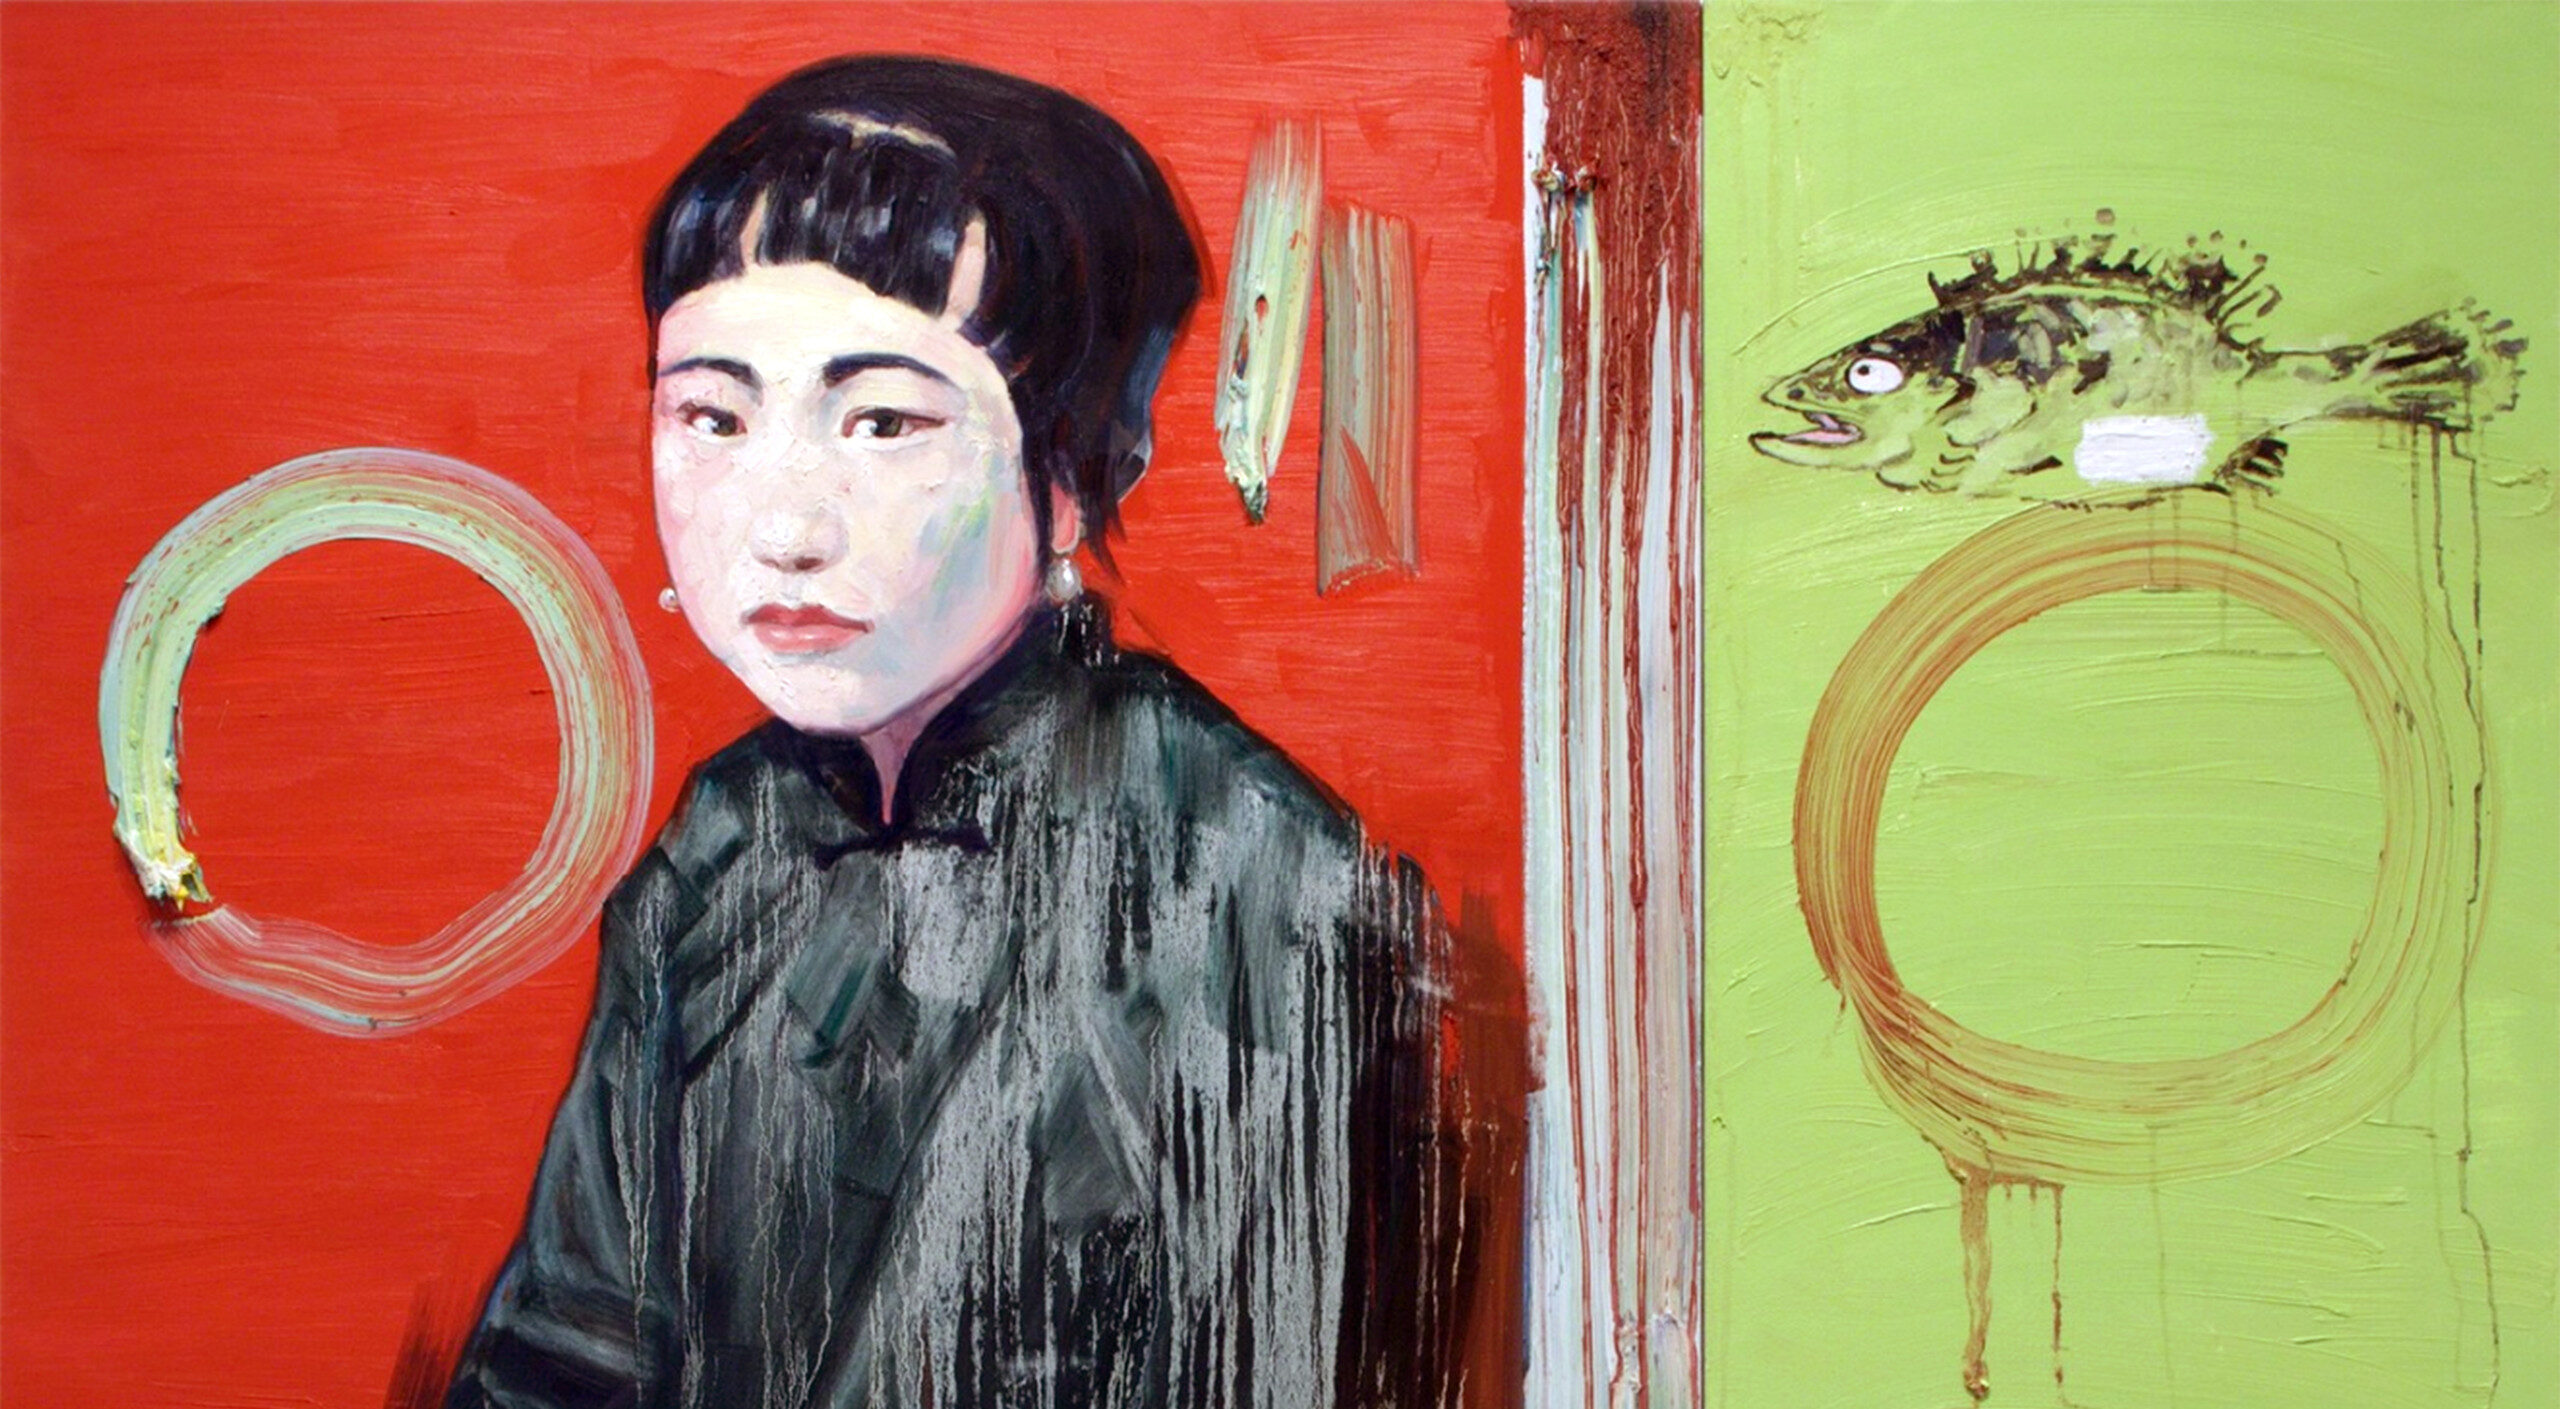 A painting of a light-skinned woman of Asian descent atop complementary colors of orange-red next to lime green. The shorthaired woman holds a pink handkerchief. To her right is a sad looking fish.